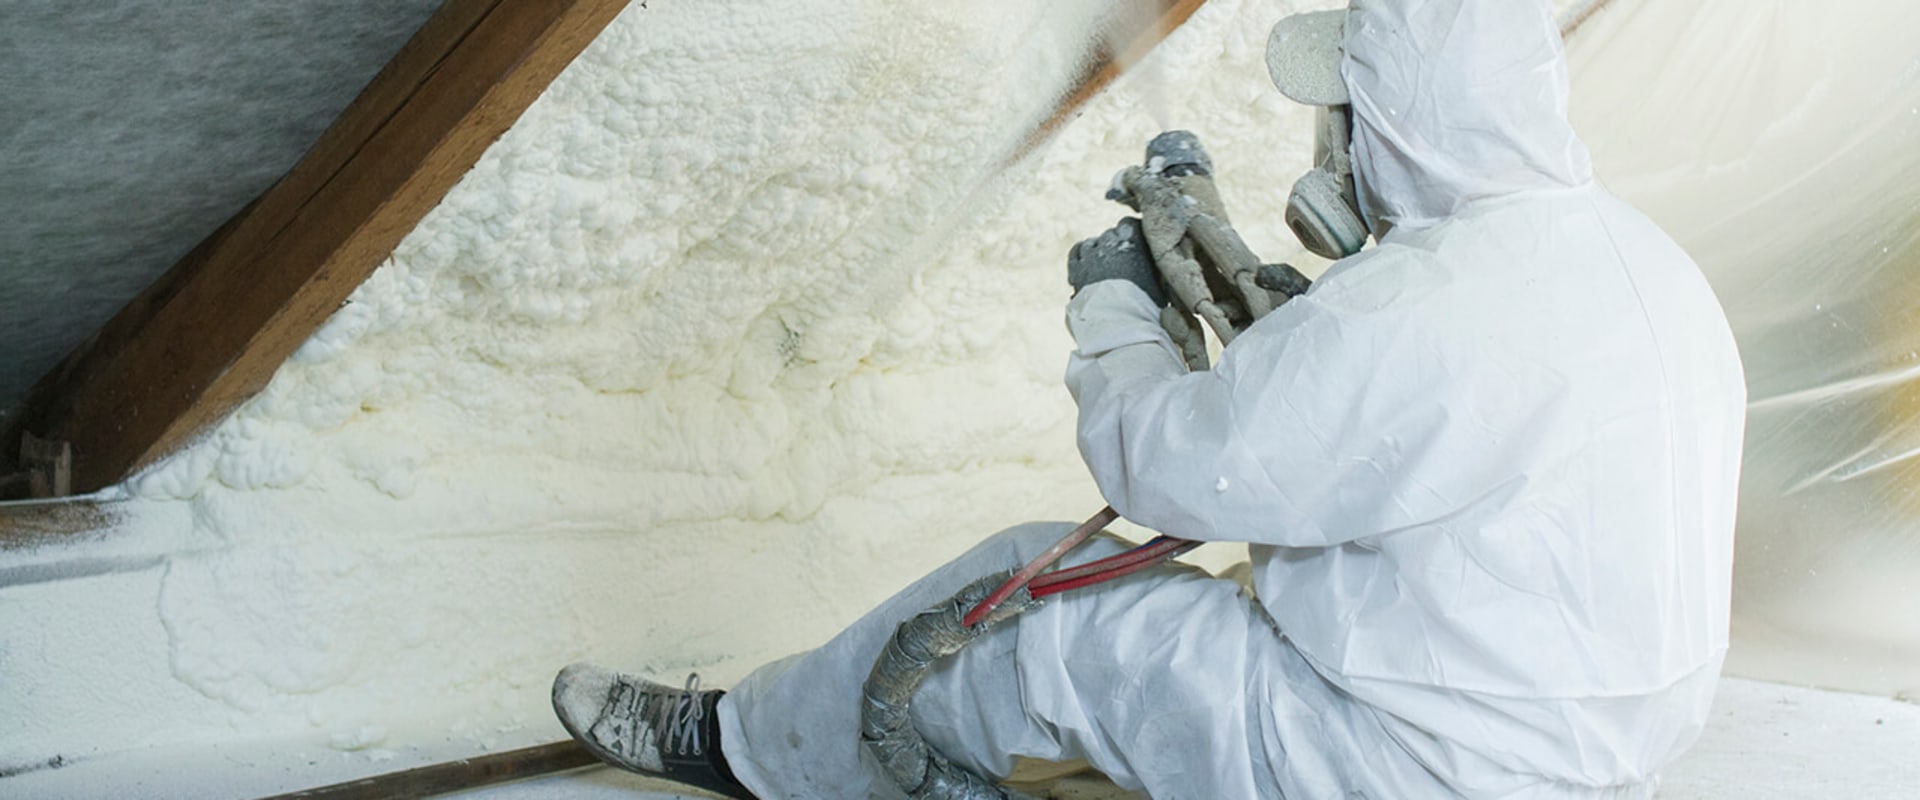 How Much Does it Cost to Install Spray Foam Insulation in Your Attic in Davie, FL?